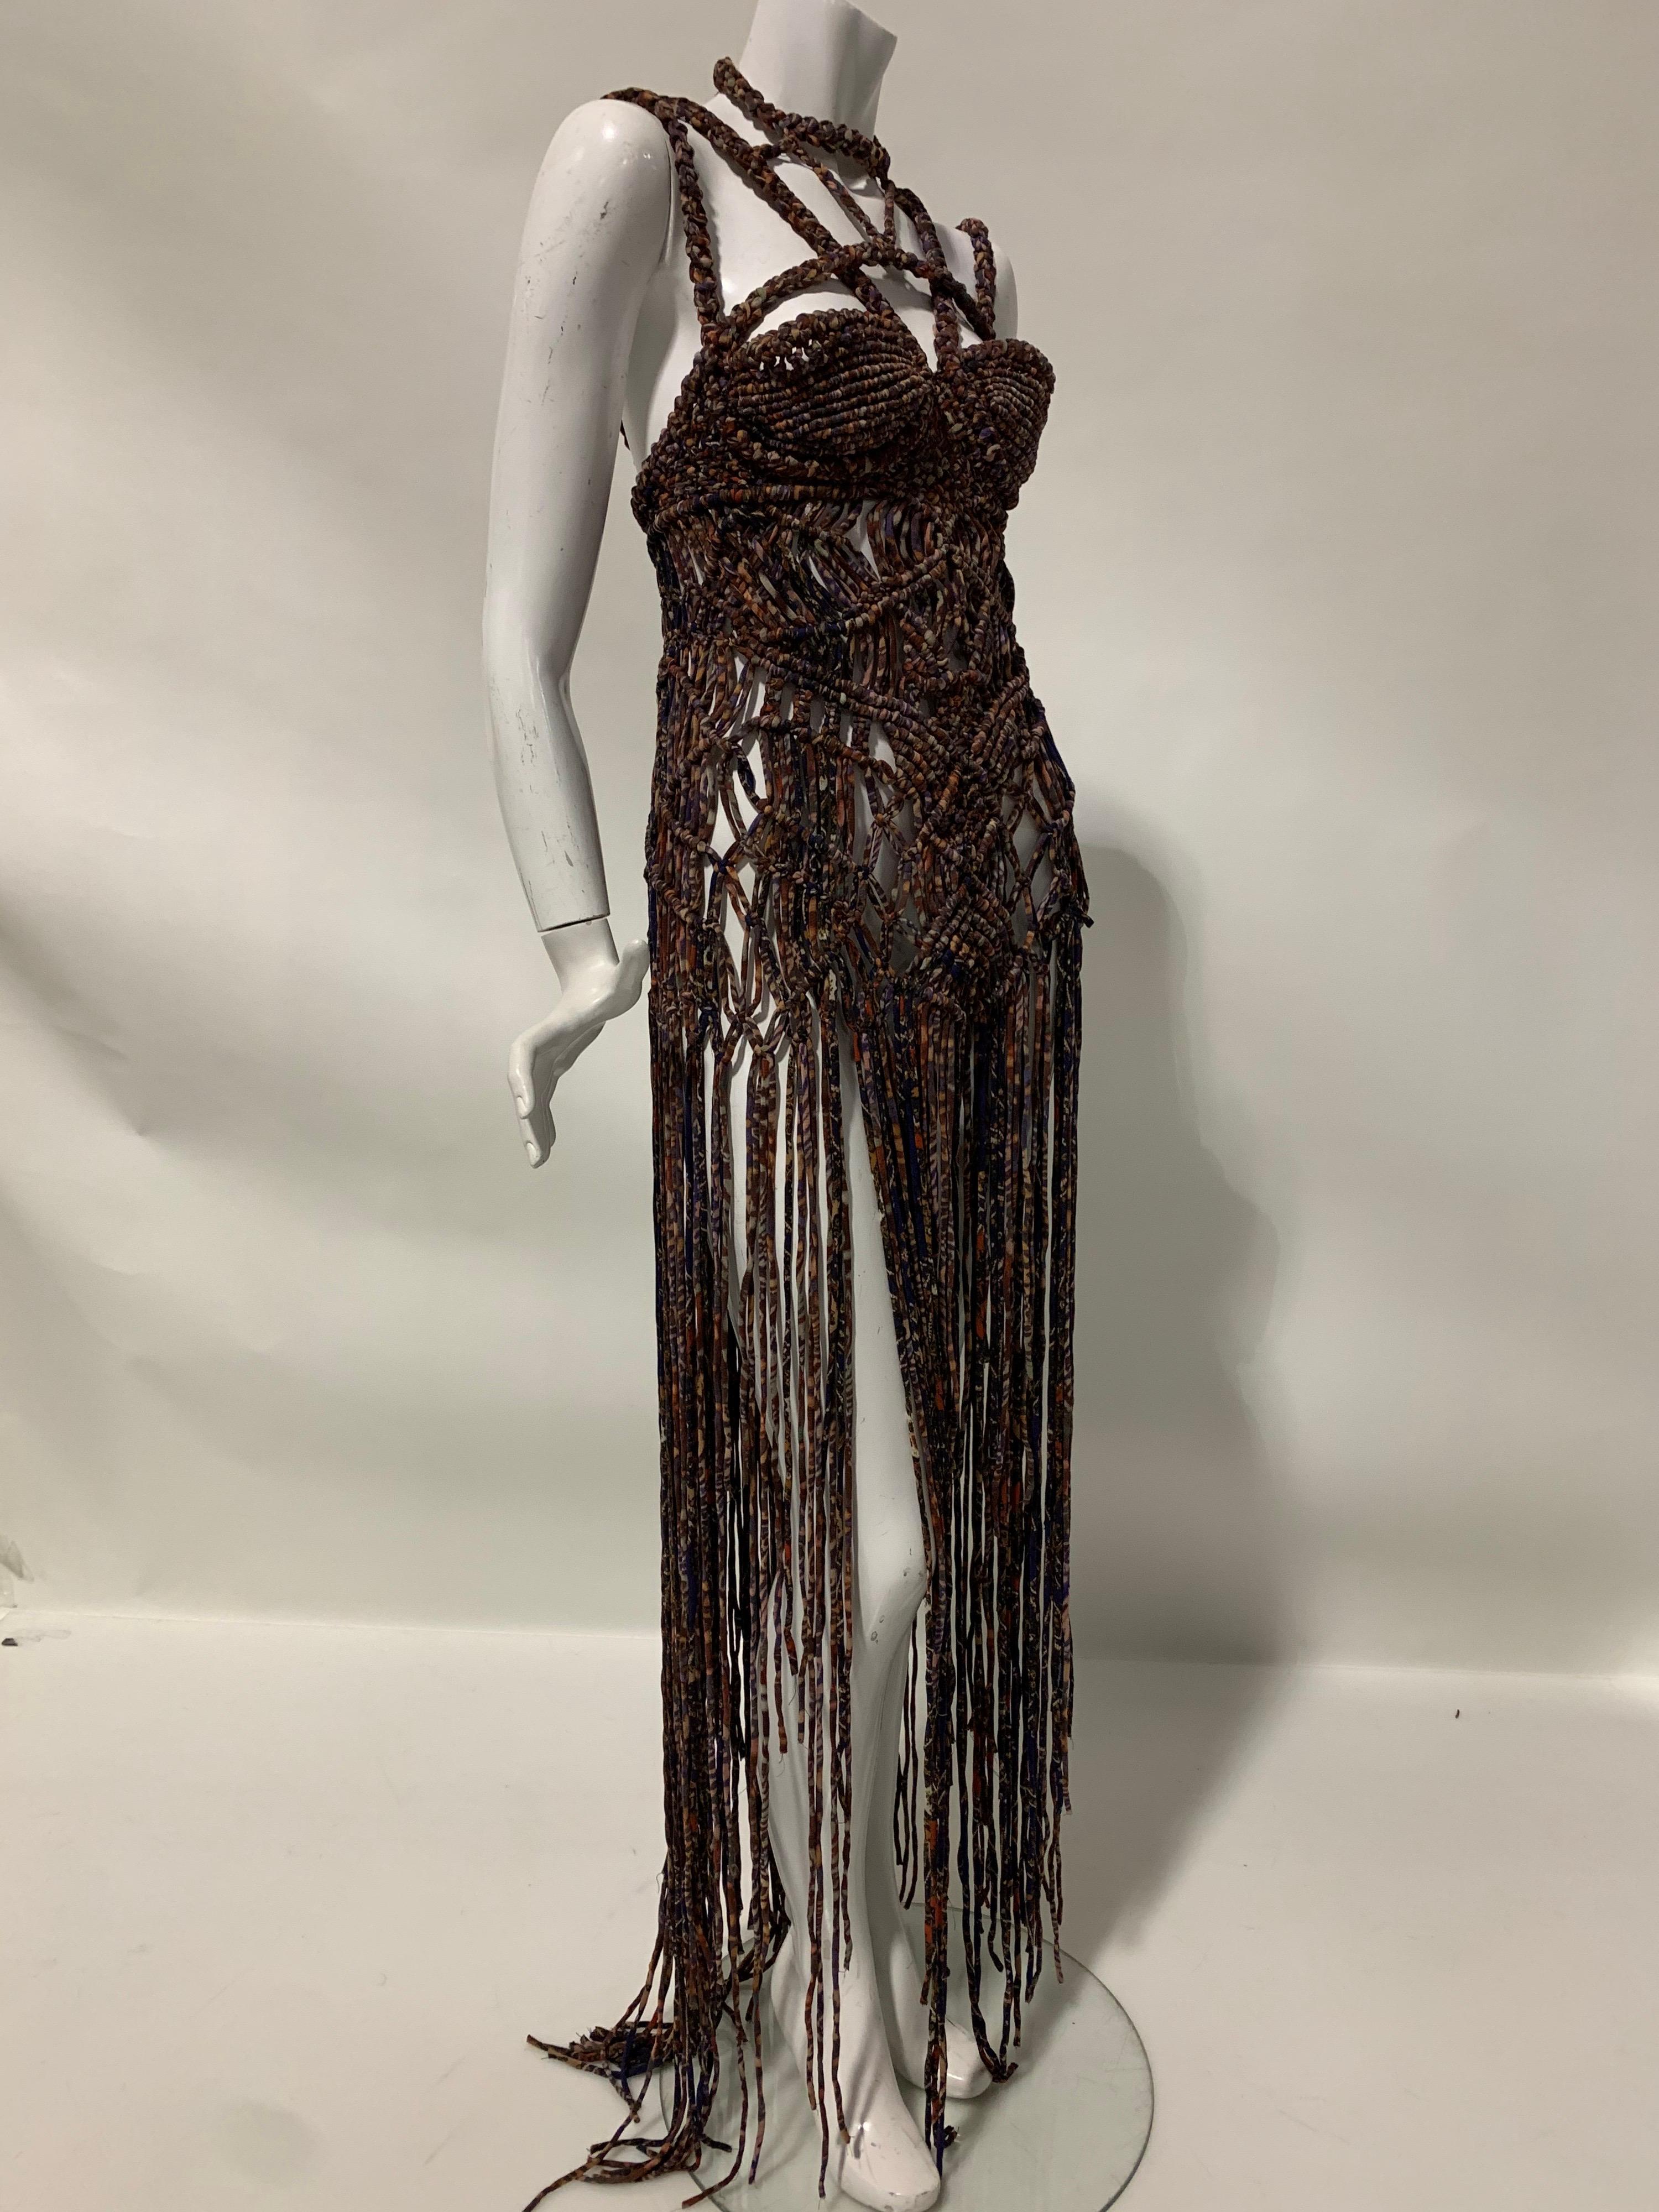 Torso Creations “Ibiza” Macrame Gown W/ Sculpted Bodice & Fringe  For Sale 1